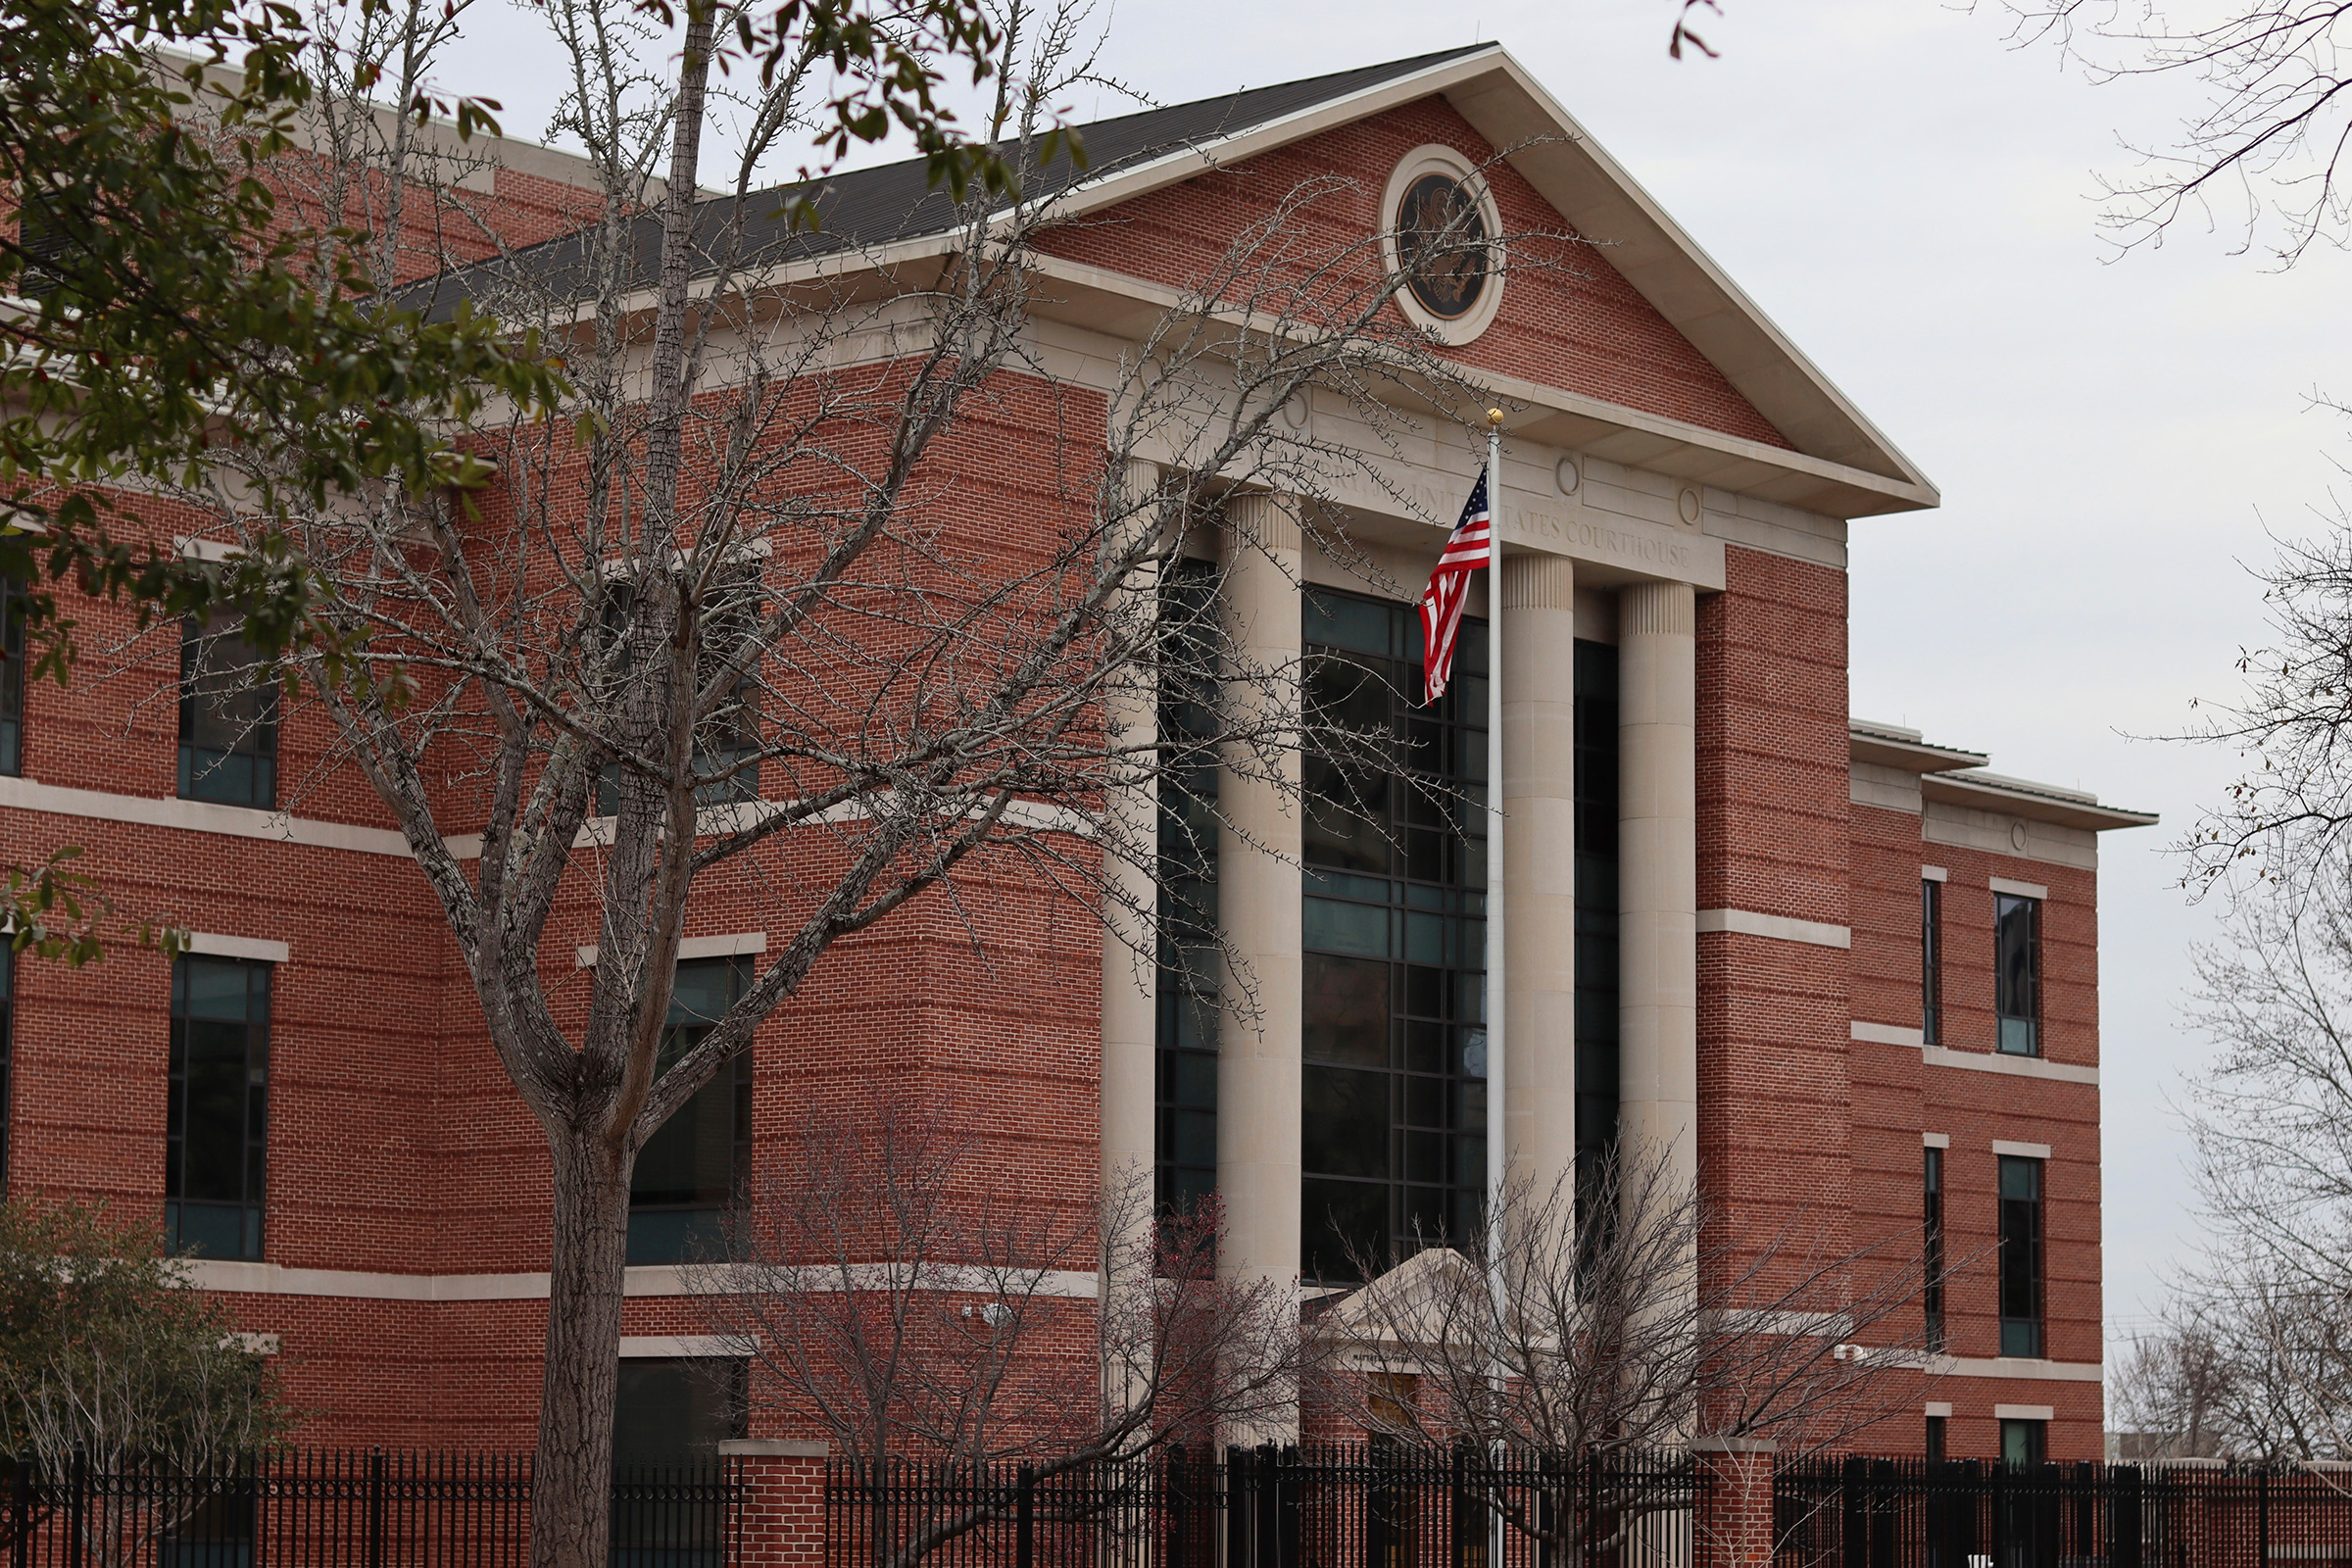 The Matthew J. Perry, Jr. Courthouse in Columbia, S.C., on Feb. 9.